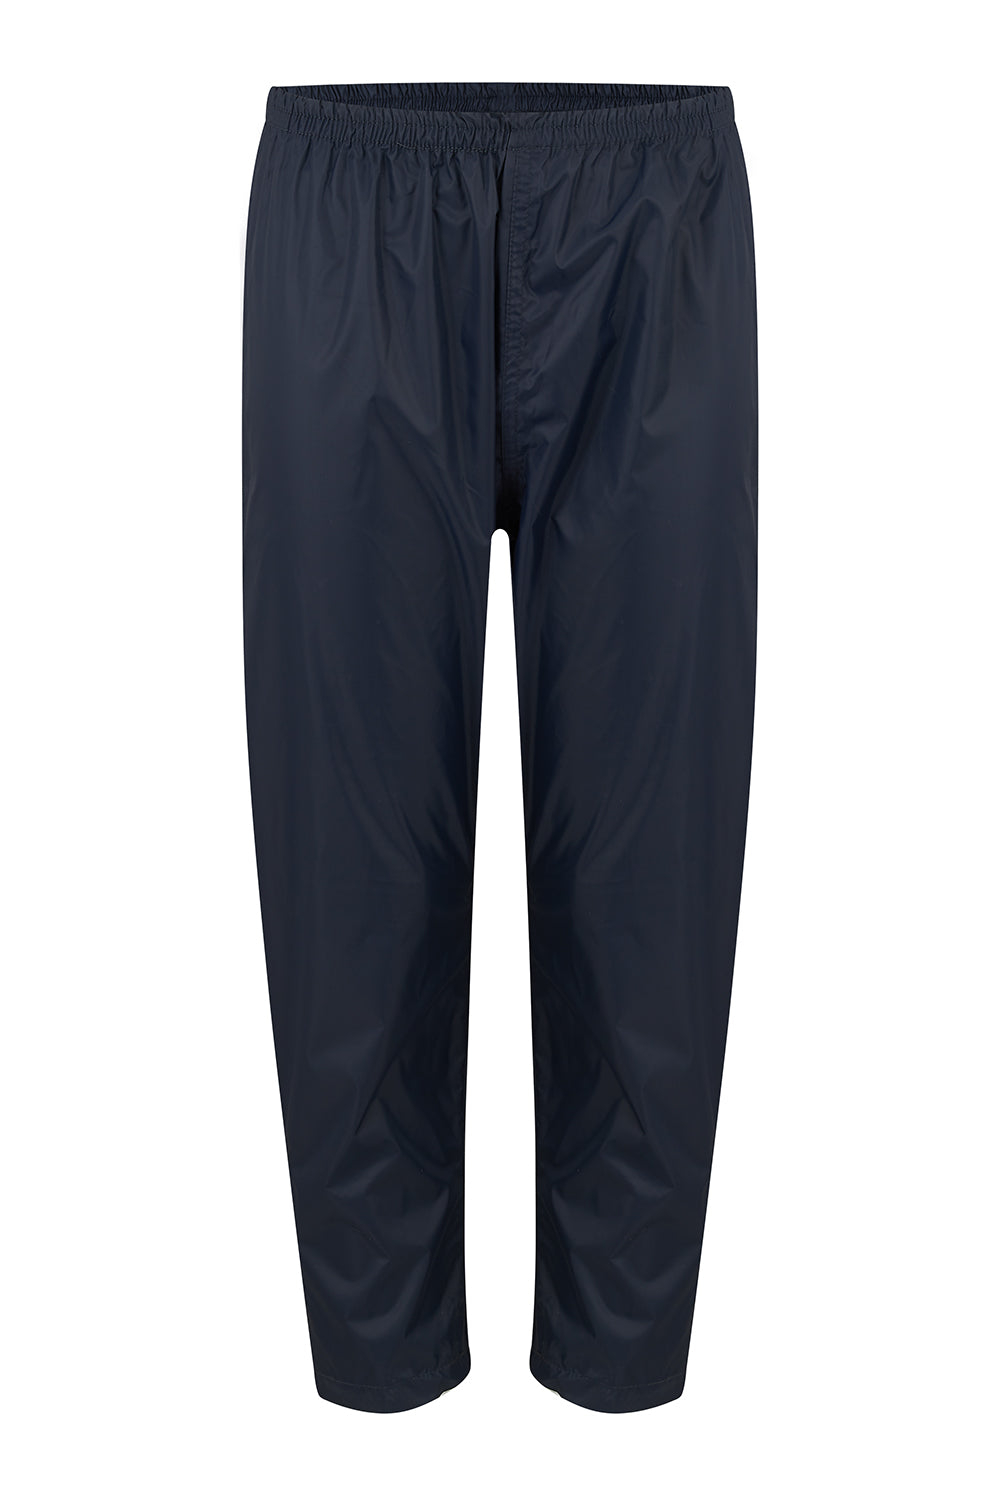 Overtrousers Mini Kids Overtrousers - Navy